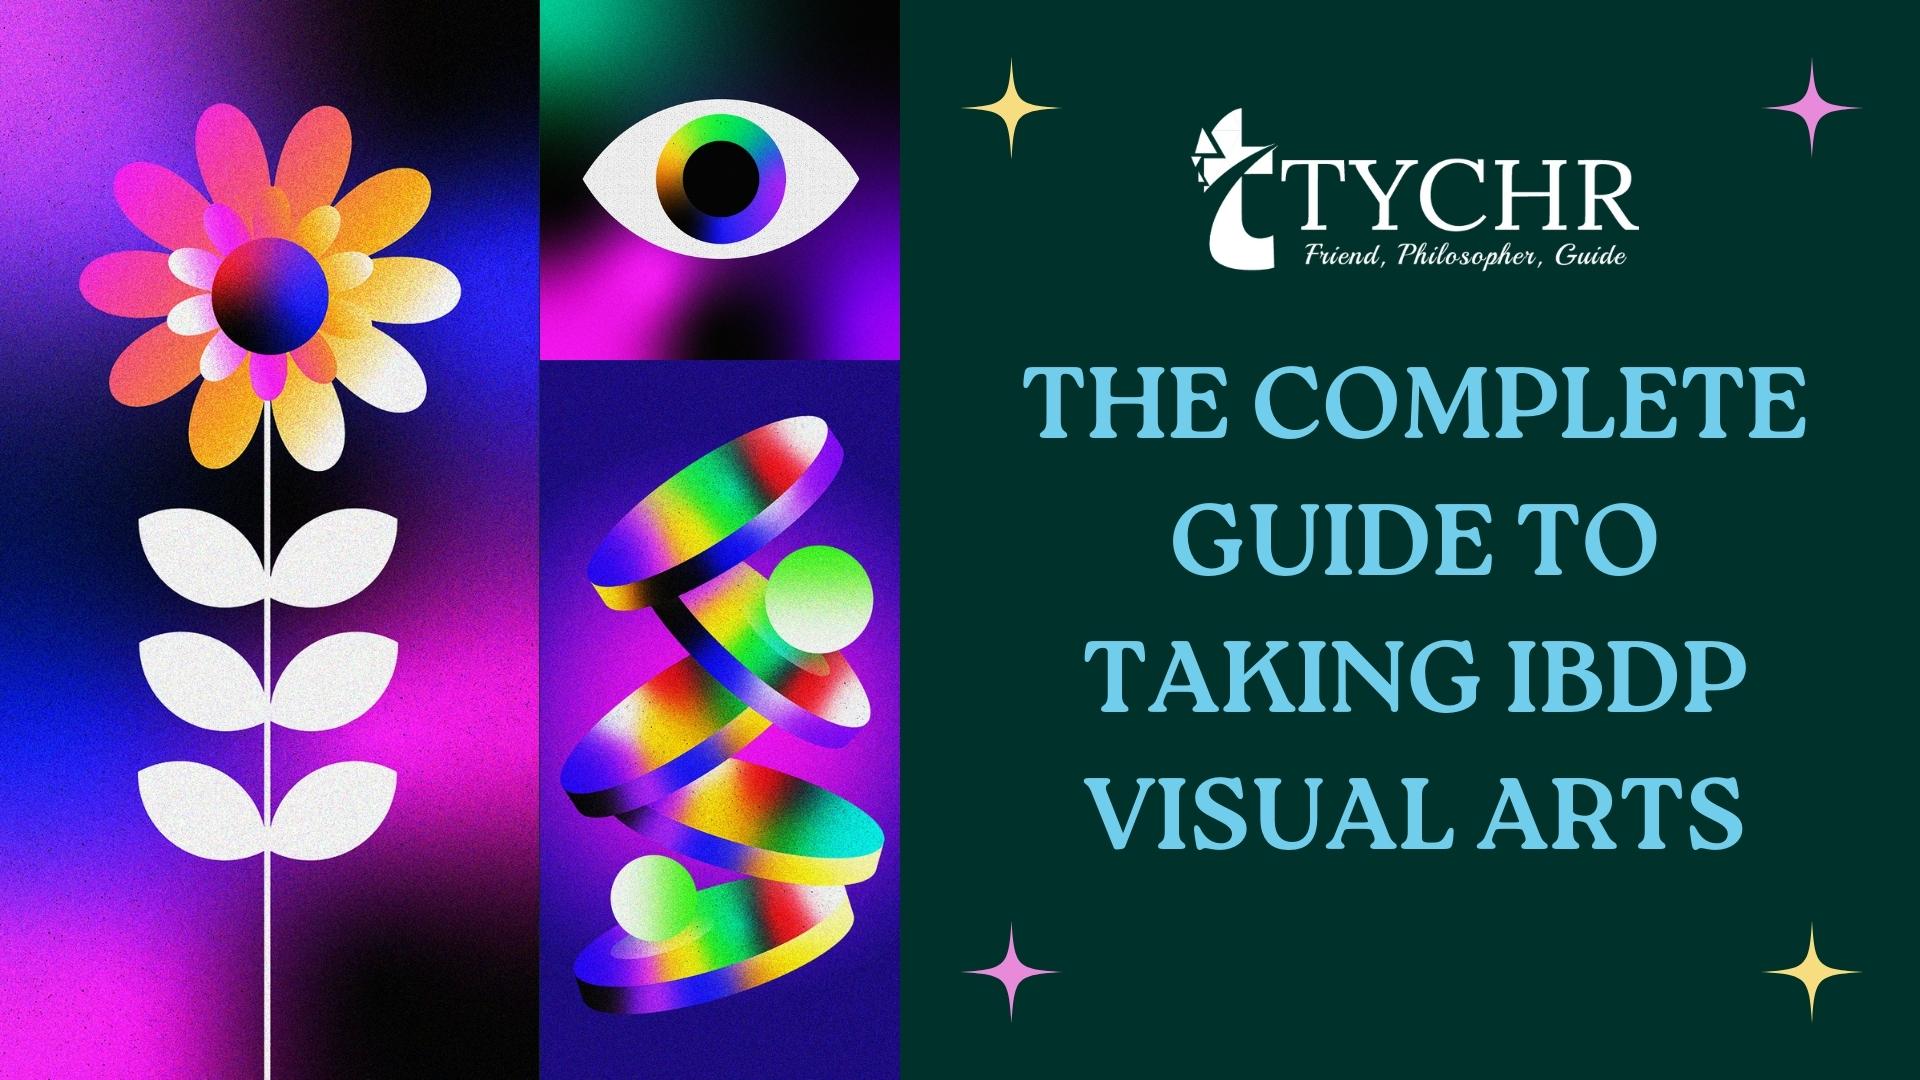 The Complete Guide to taking IBDP Visual Arts